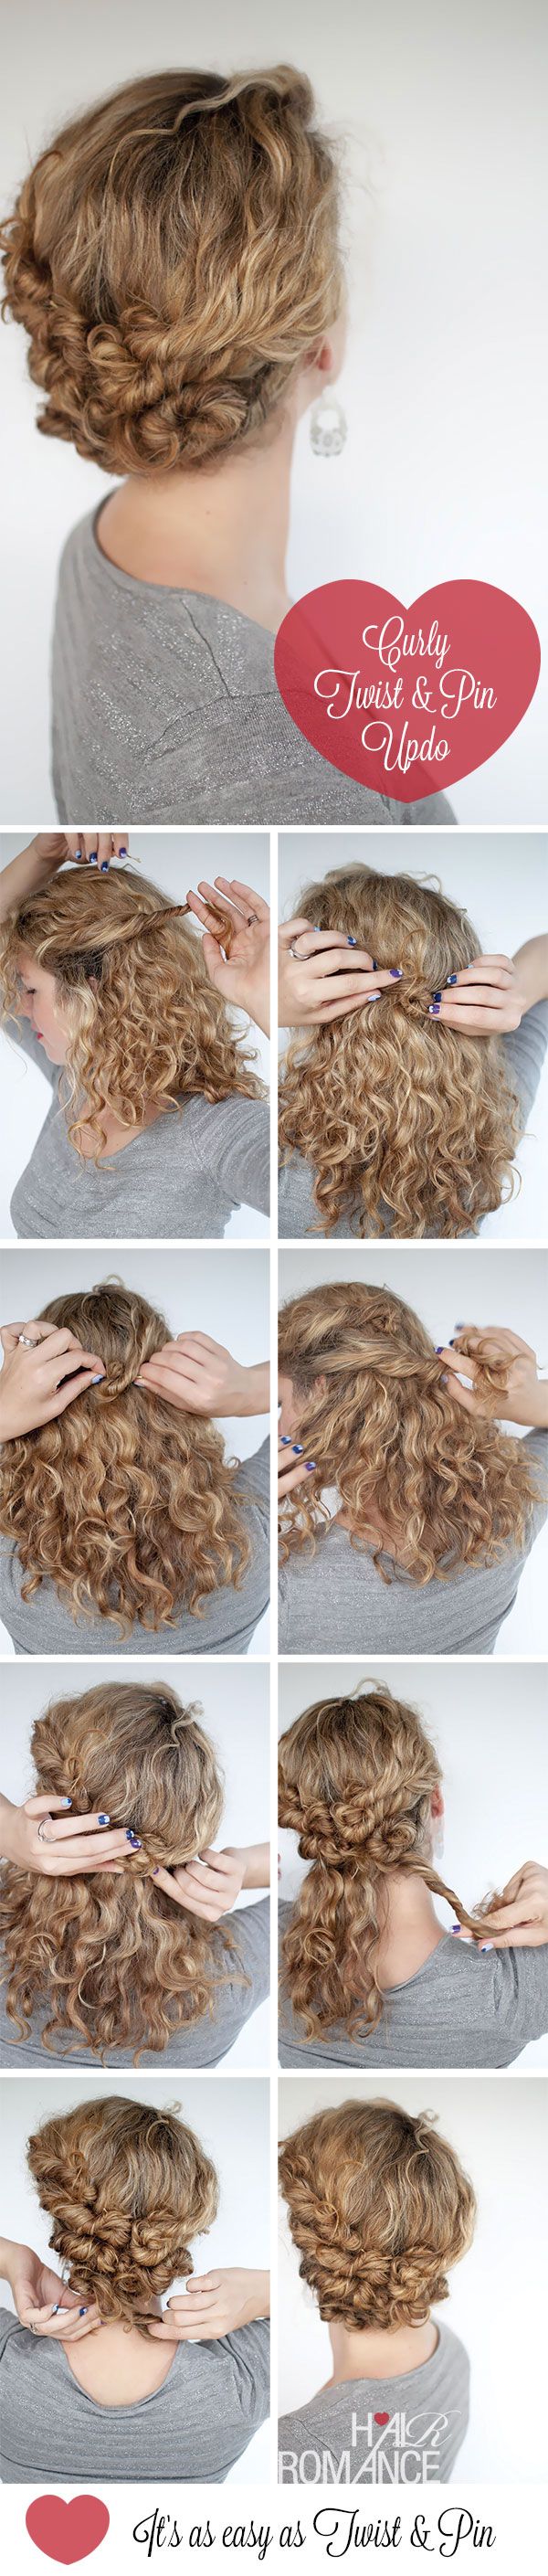 Tutorial: Give a Twist to Curly Hair